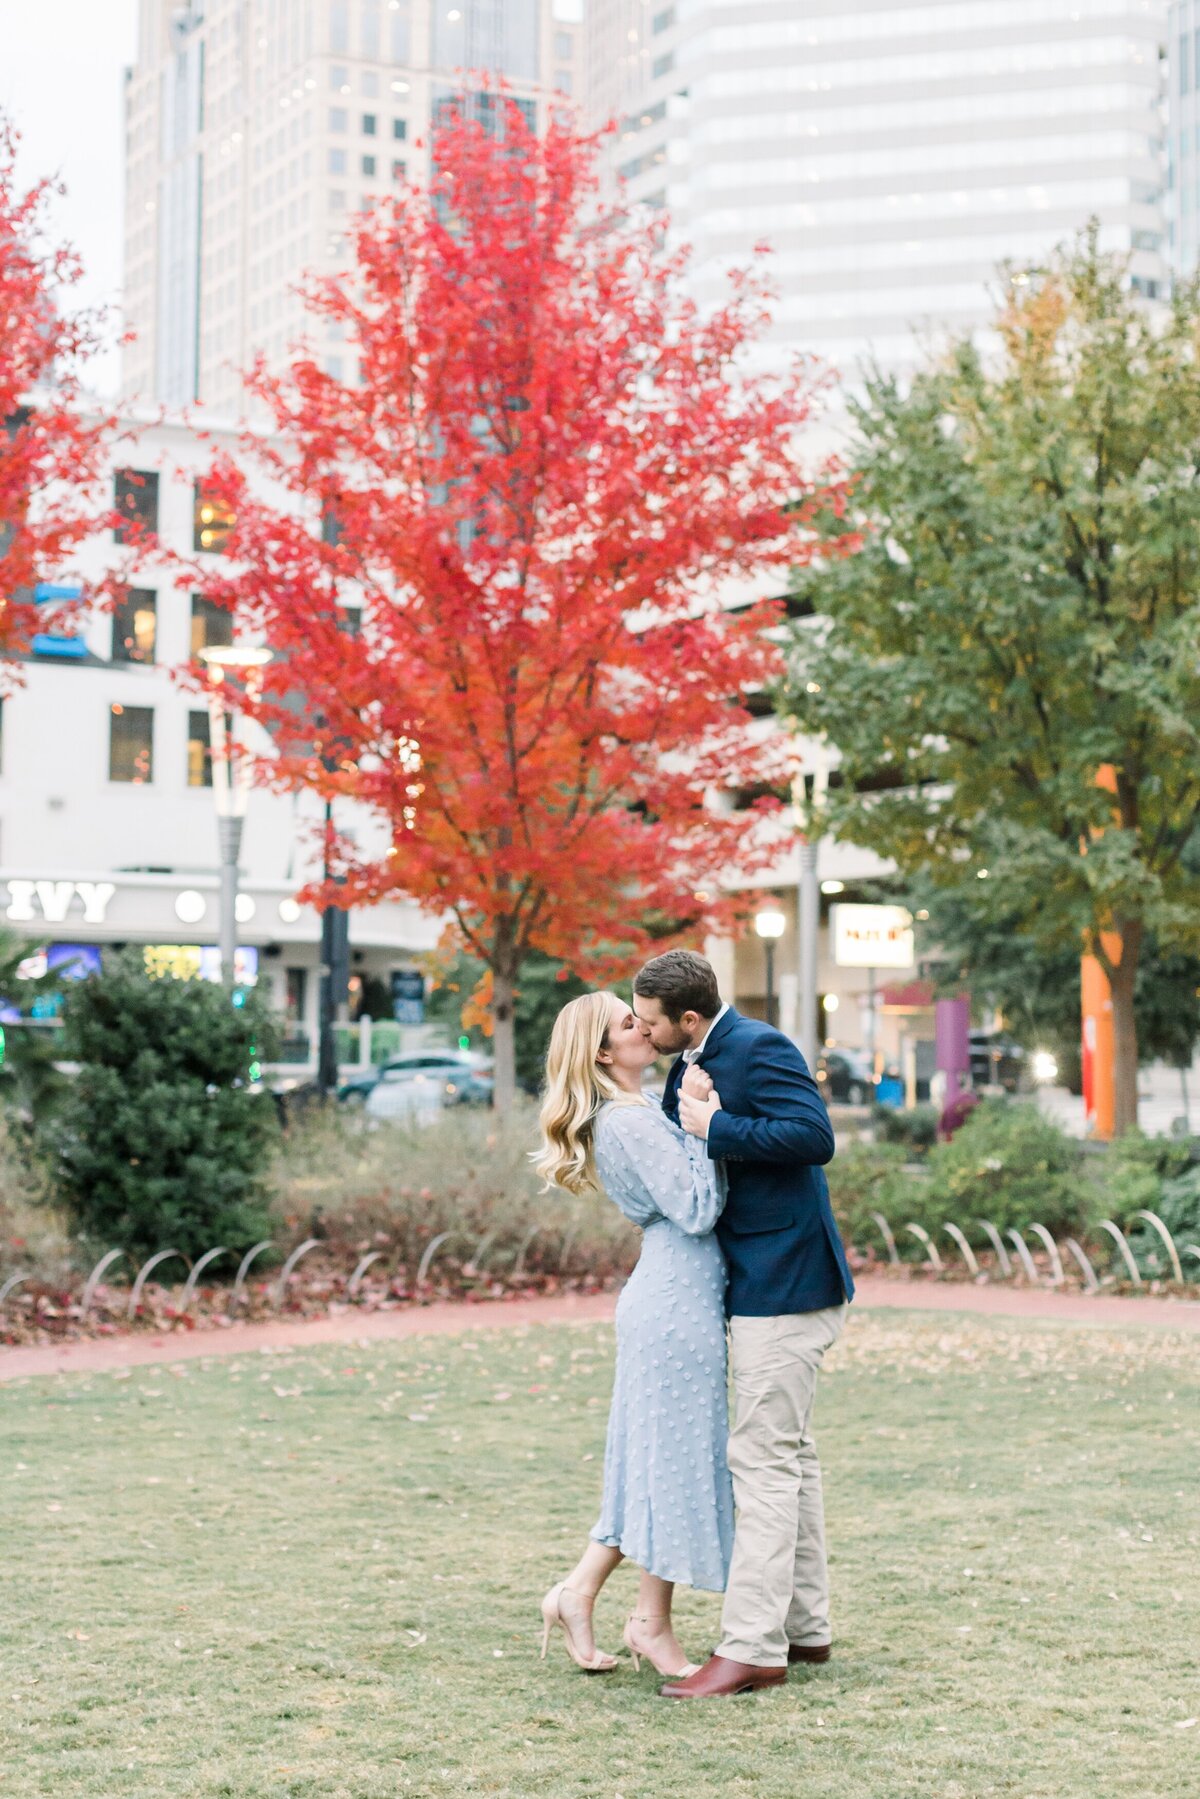 Steve and Sydeny-Engagement Session-Samantha Laffoon Photography-110